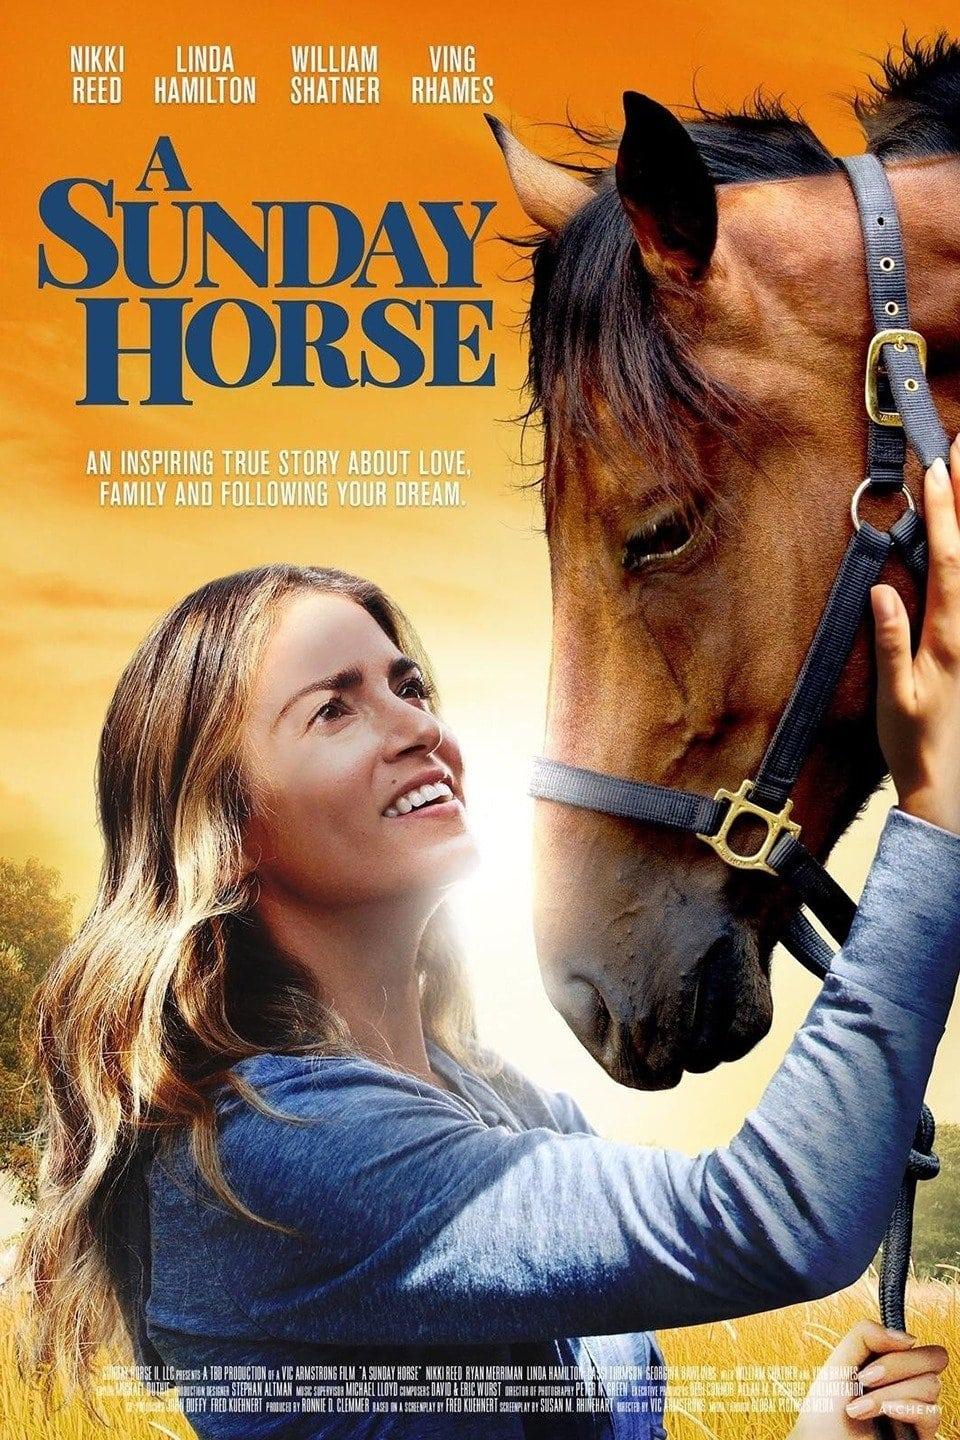 A Sunday Horse poster